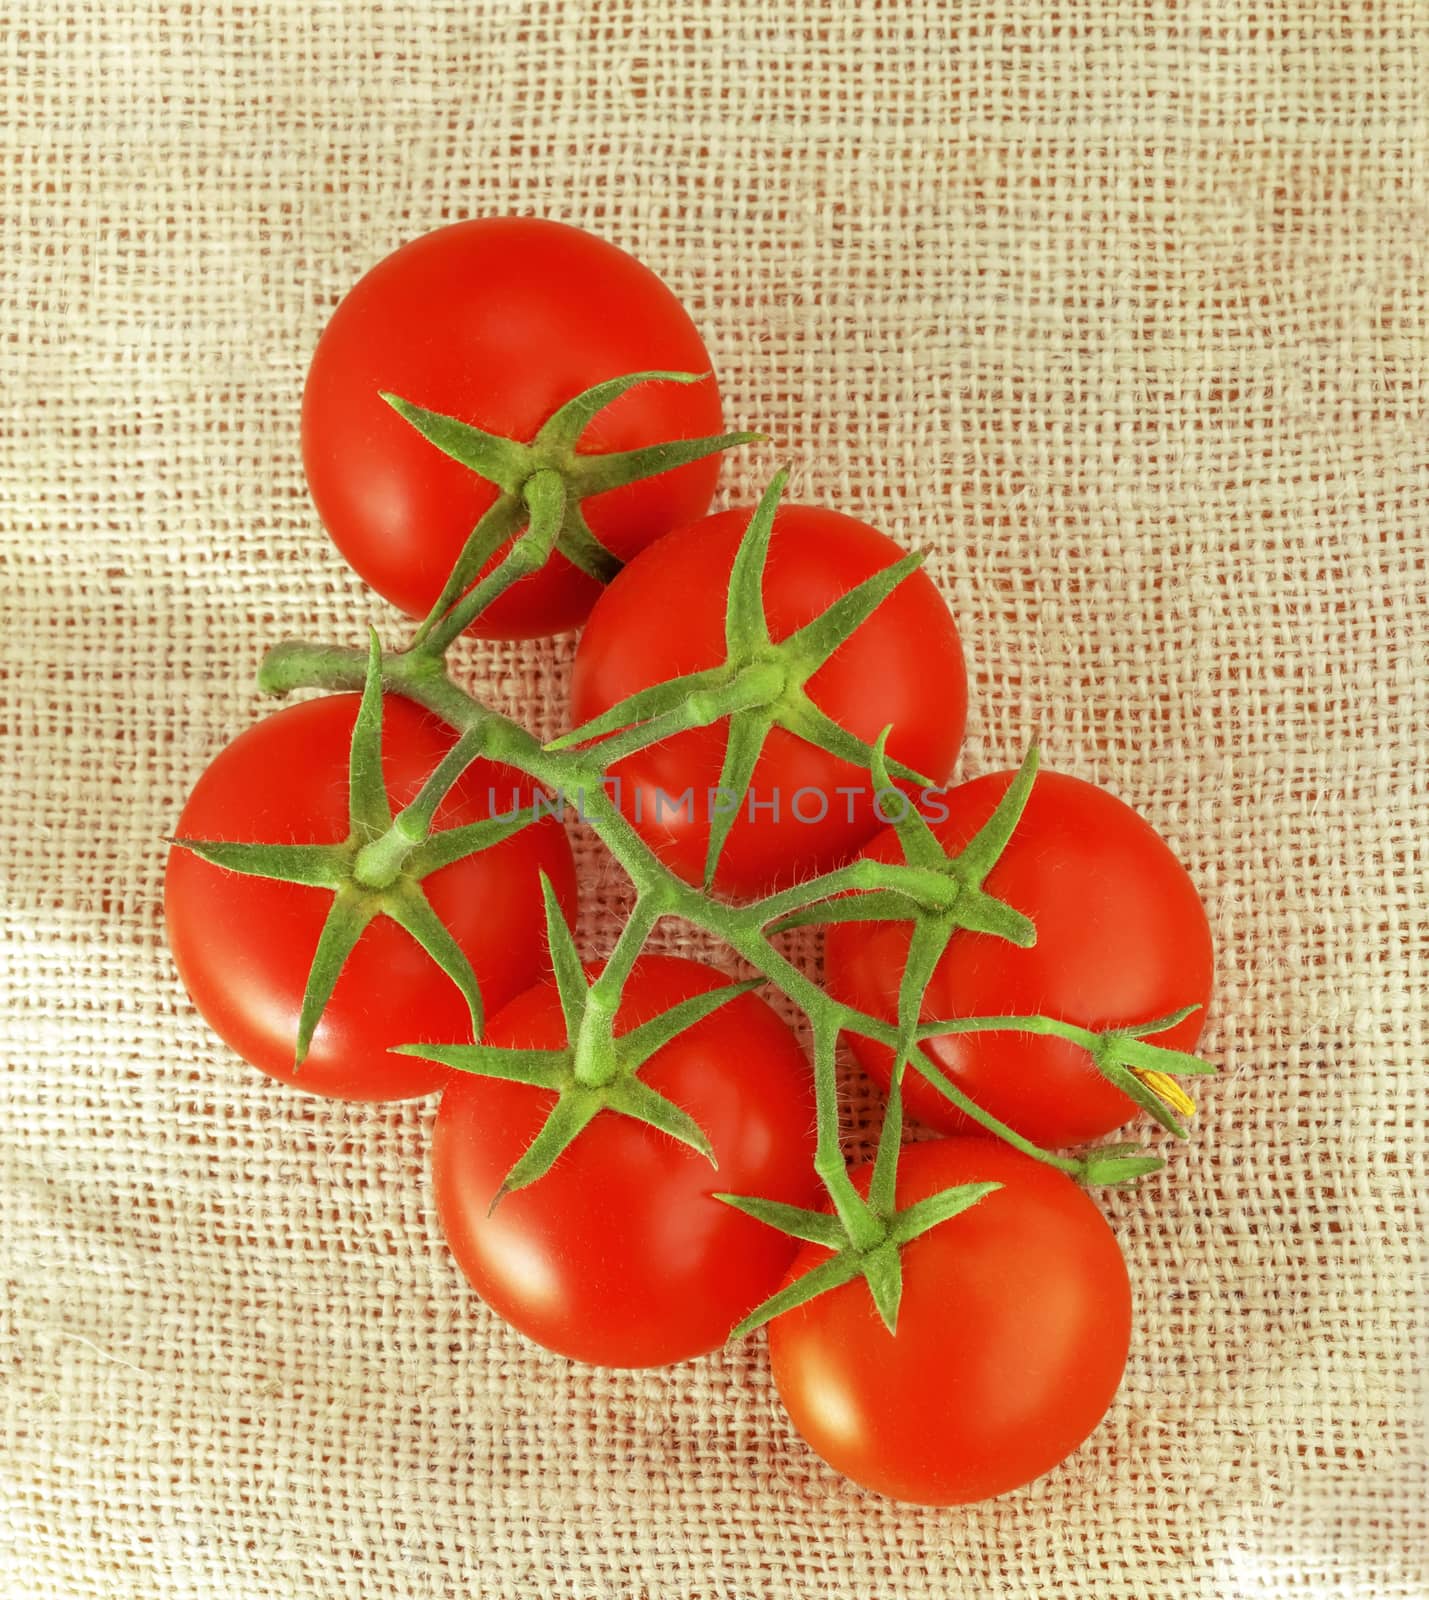 Bunch of fresh red Tomatoes on rustic fabric background.